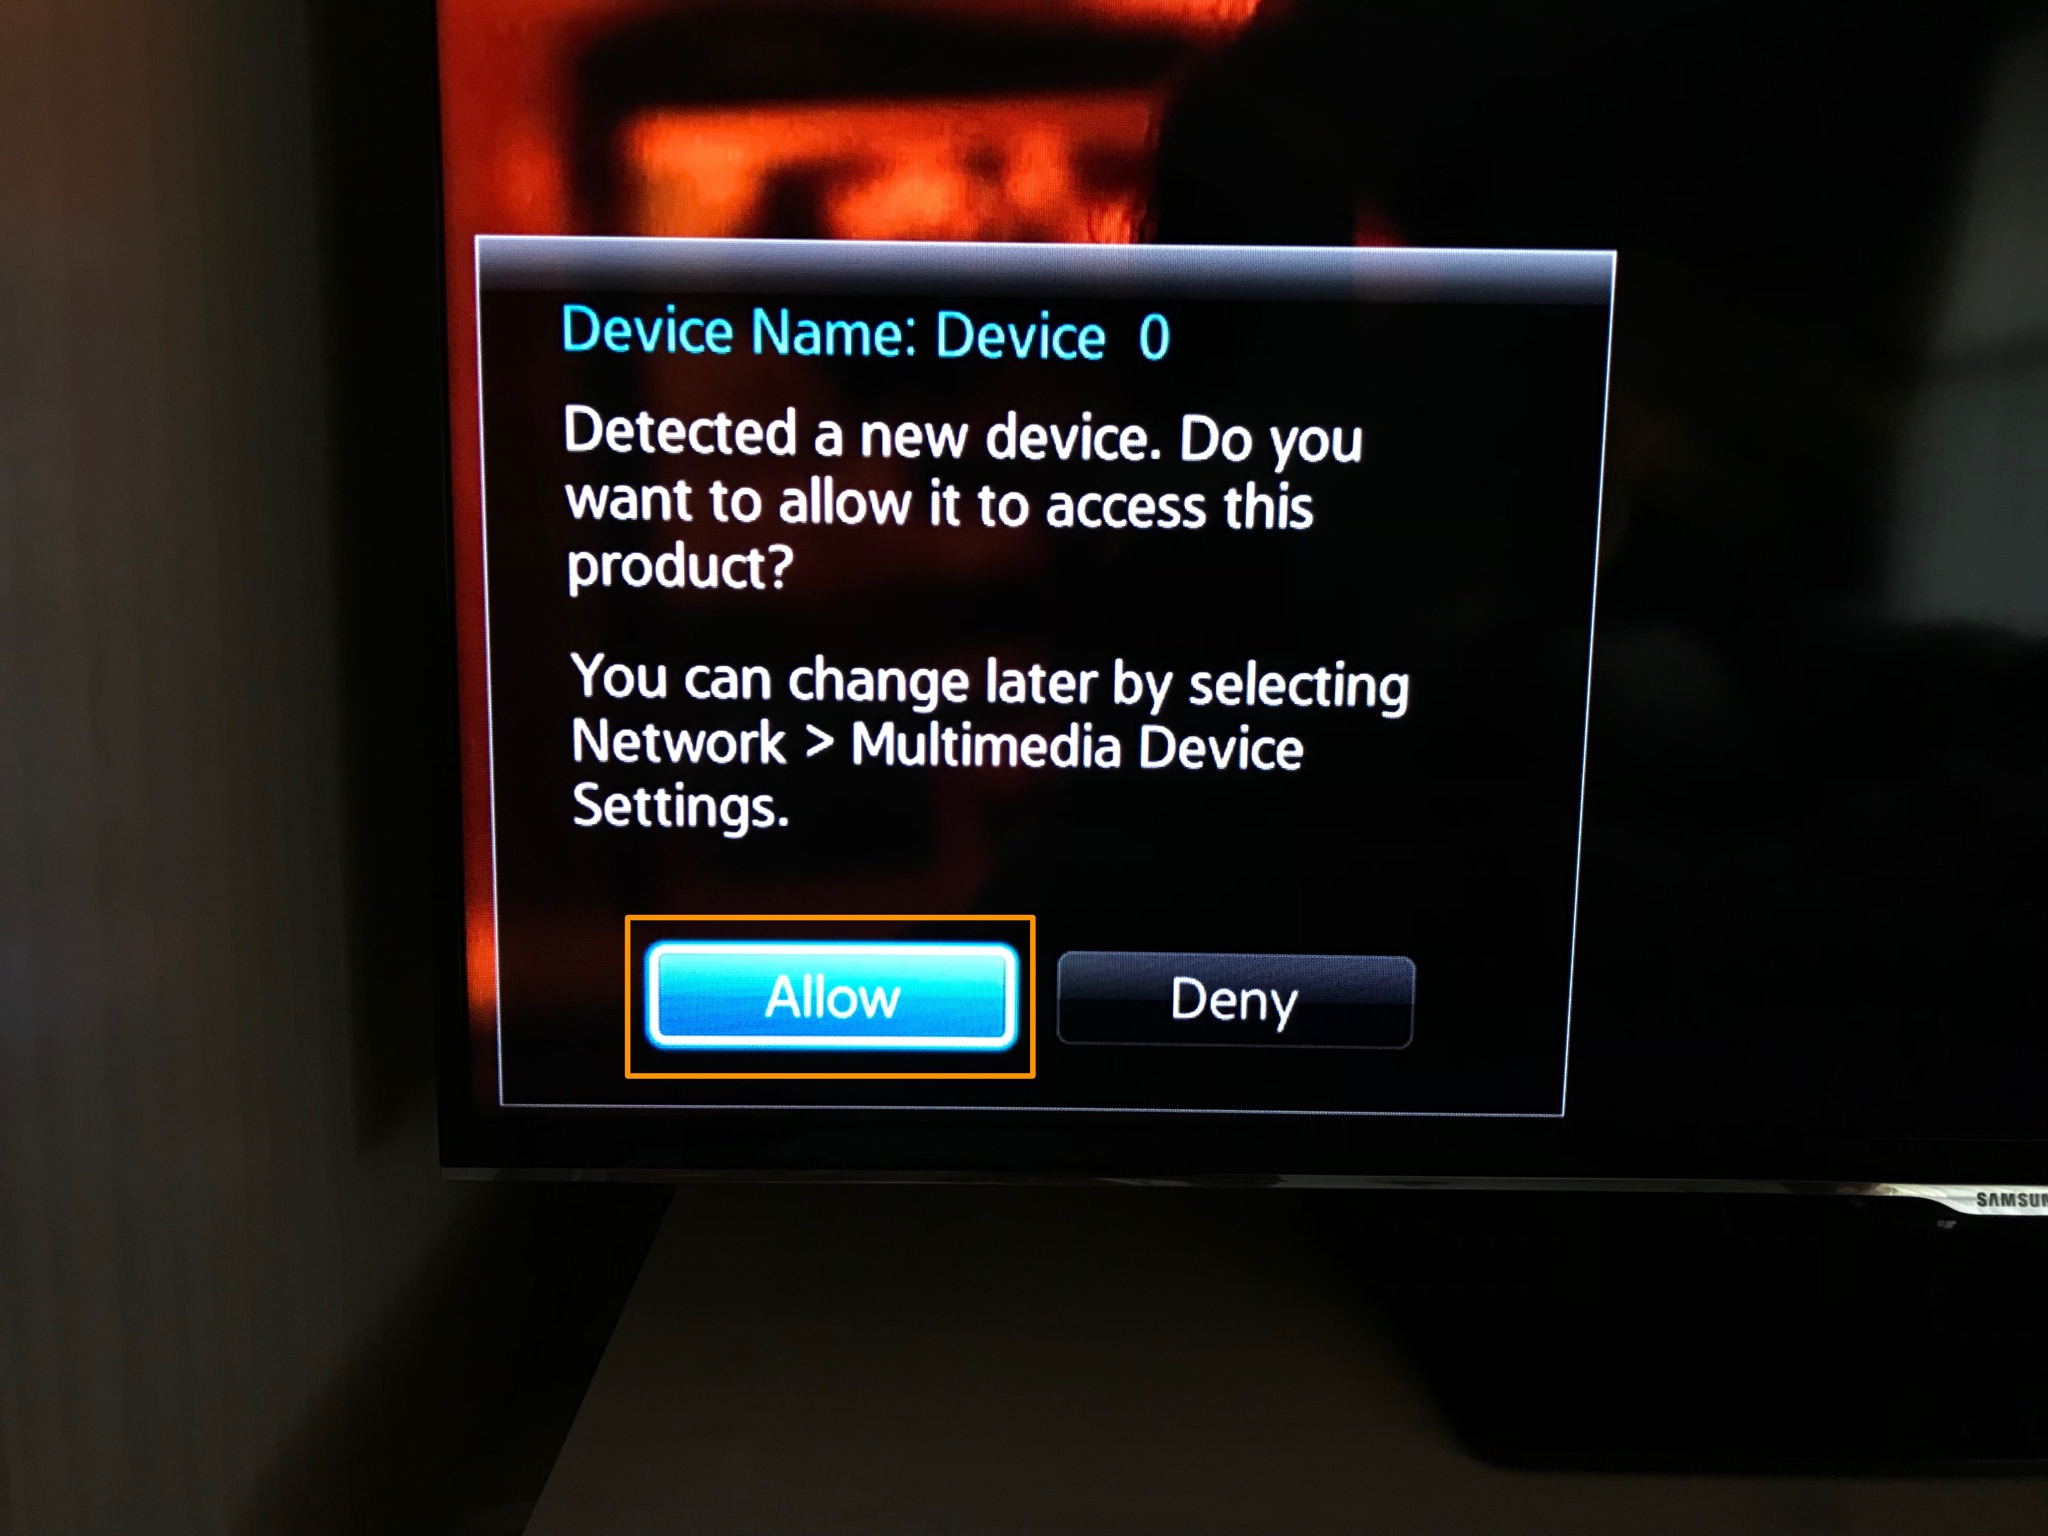 Mirror Your Iphone Or Ipad On A Smart Tv, Can I Mirror From Ipad To Samsung Tv